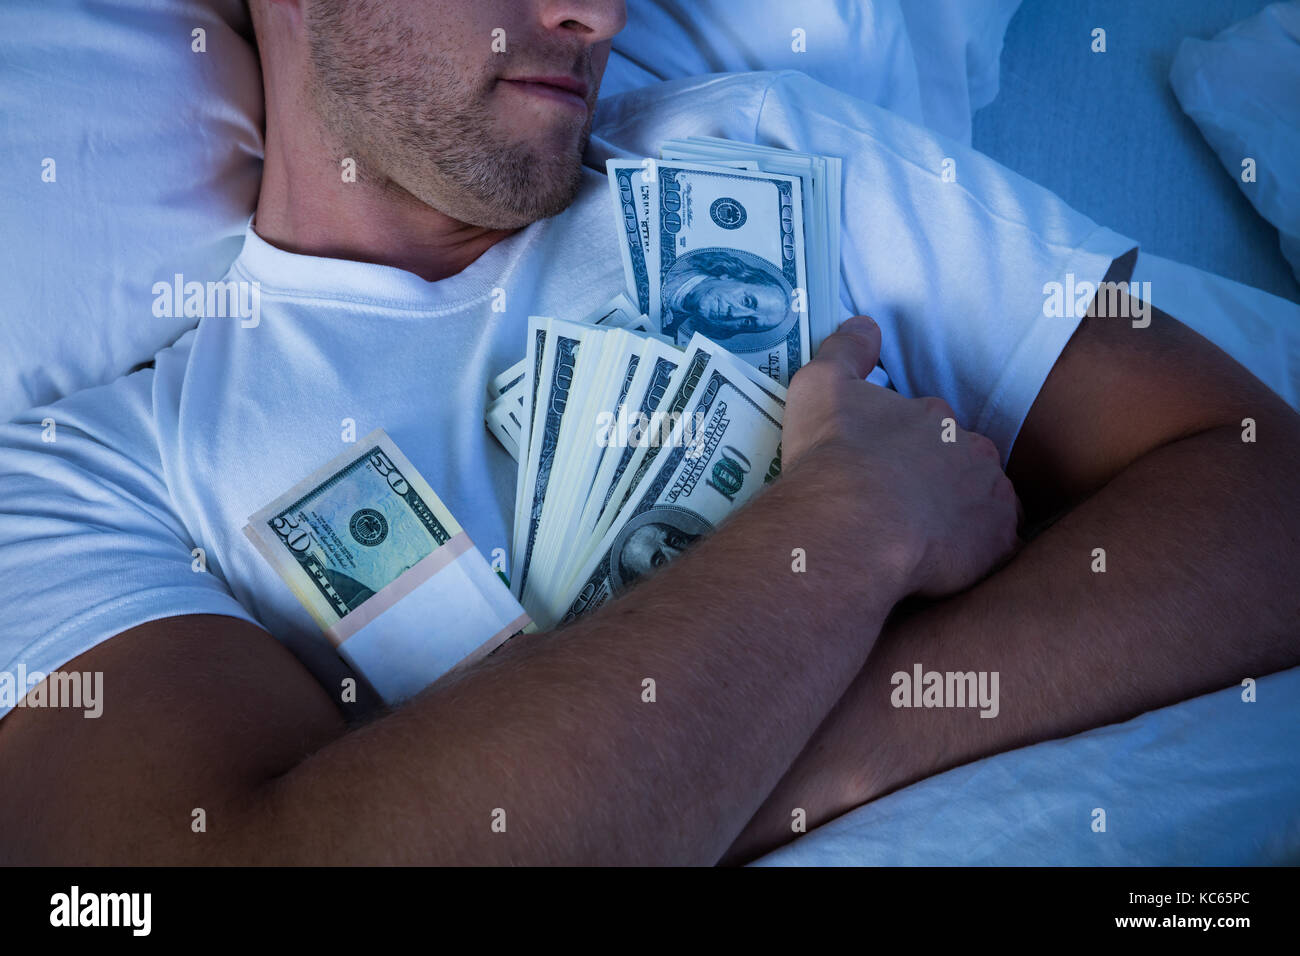 Man Sleeping On Bed With Bundle Of Currency Notes Stock Photo